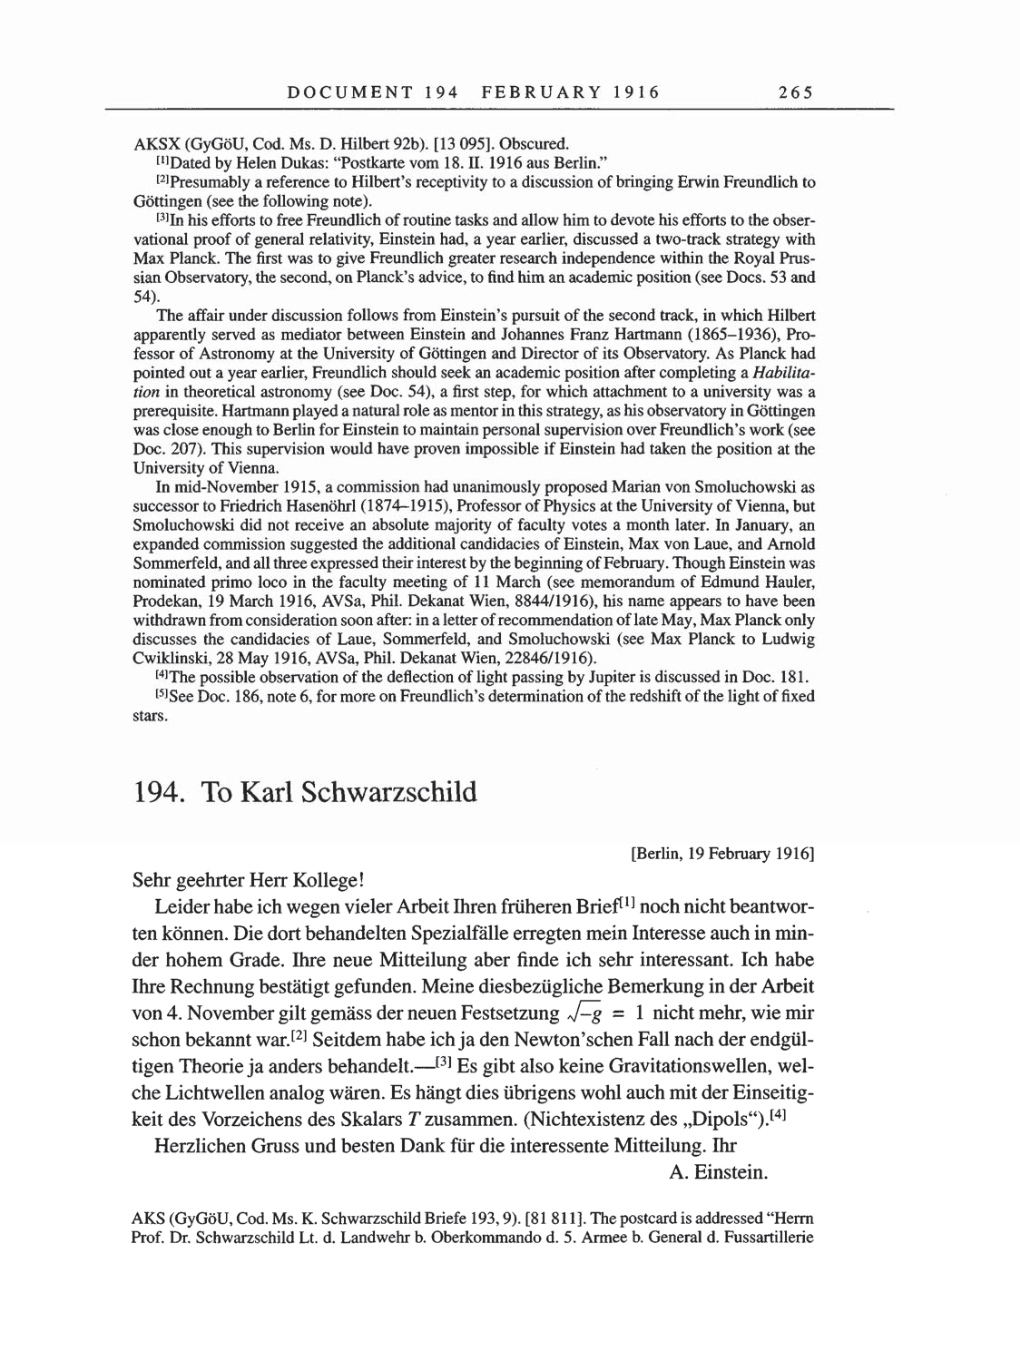 Volume 8, Part A: The Berlin Years: Correspondence 1914-1917 page 265